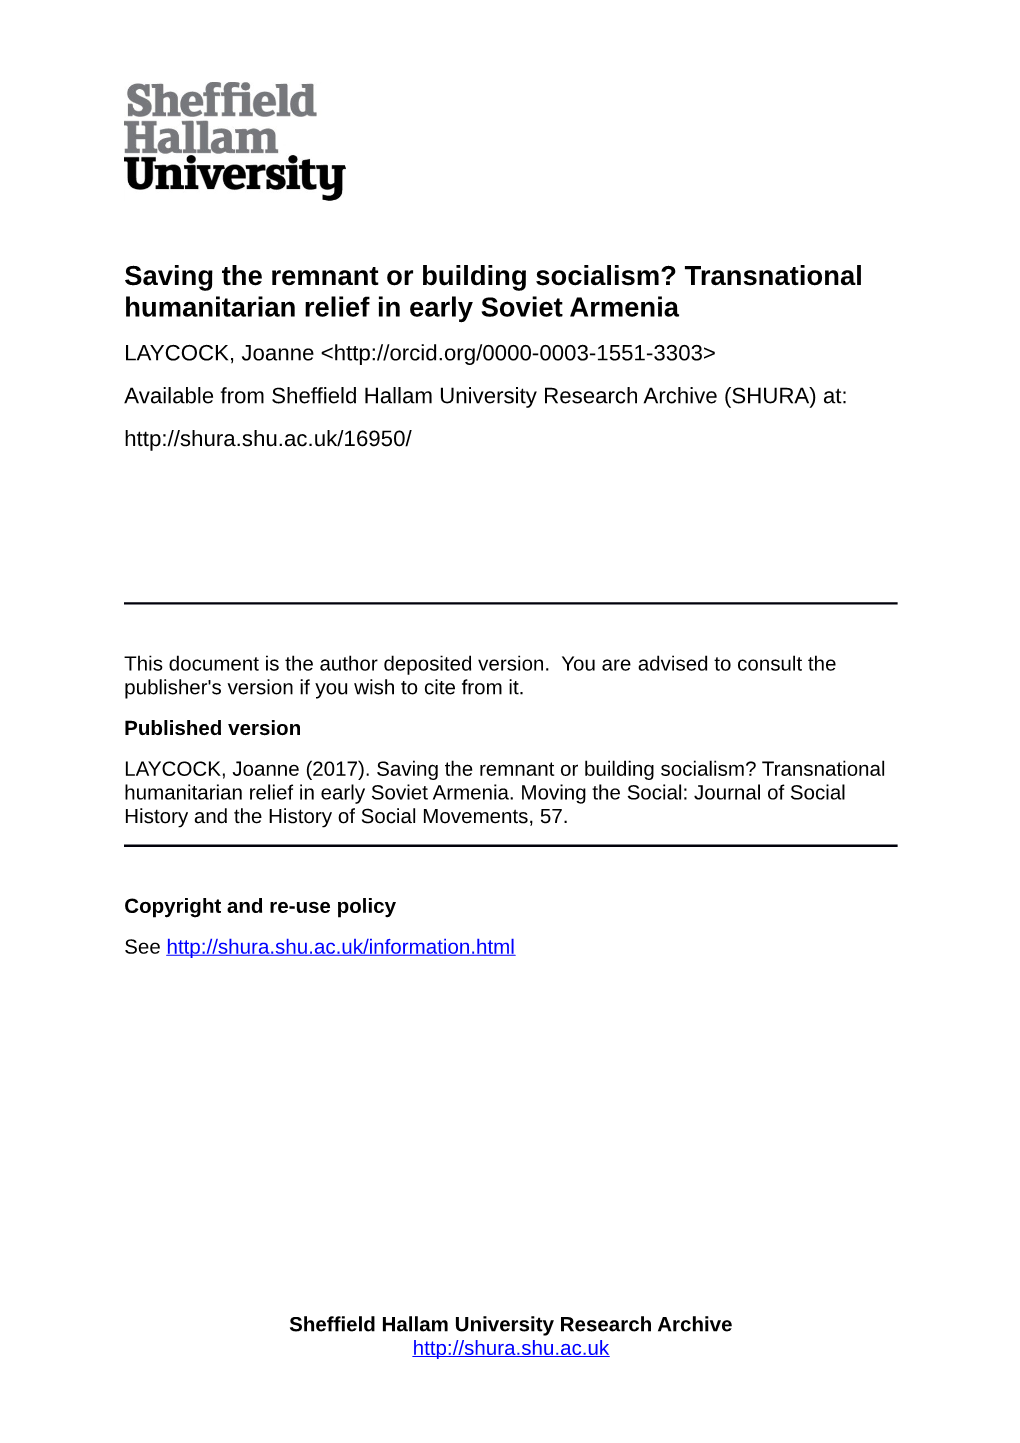 Saving the Remnant Or Building Socialism? Transnational